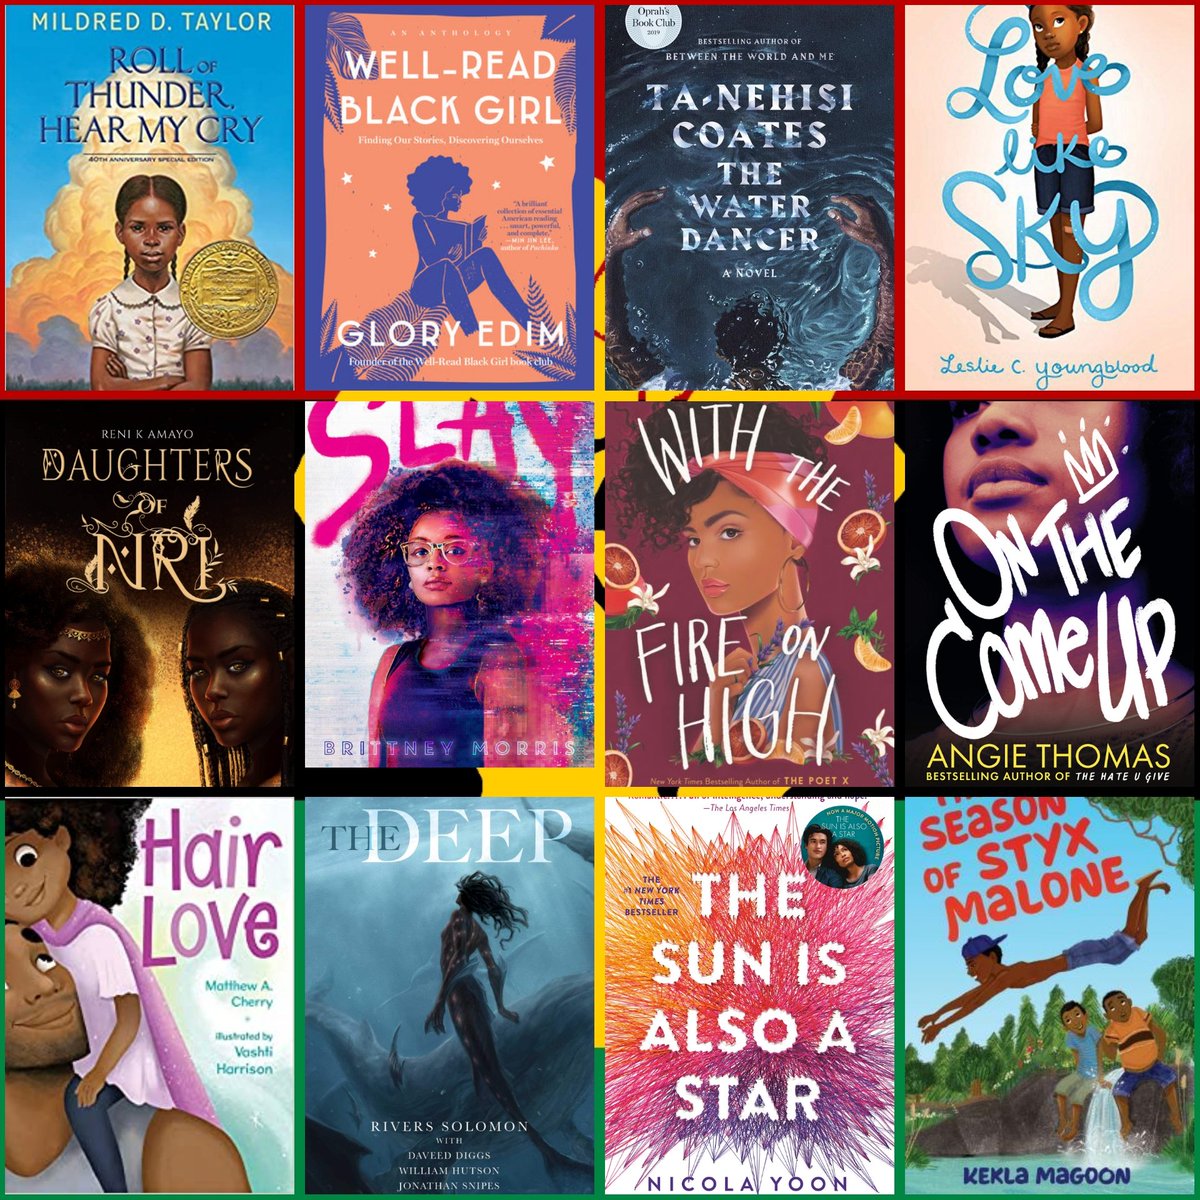 Roll of Thunder, Hear My Cry - Mildred D. TaylorWell-Read Black Girl - Gloria EdimThe Water Dancer - Ta-Nehisi CoatesLove Like Sky - Leslie C. YoungbloodThe Daughters of Nri - Reni K. AmayoSlay - Brittney Morris(cont'd)6/